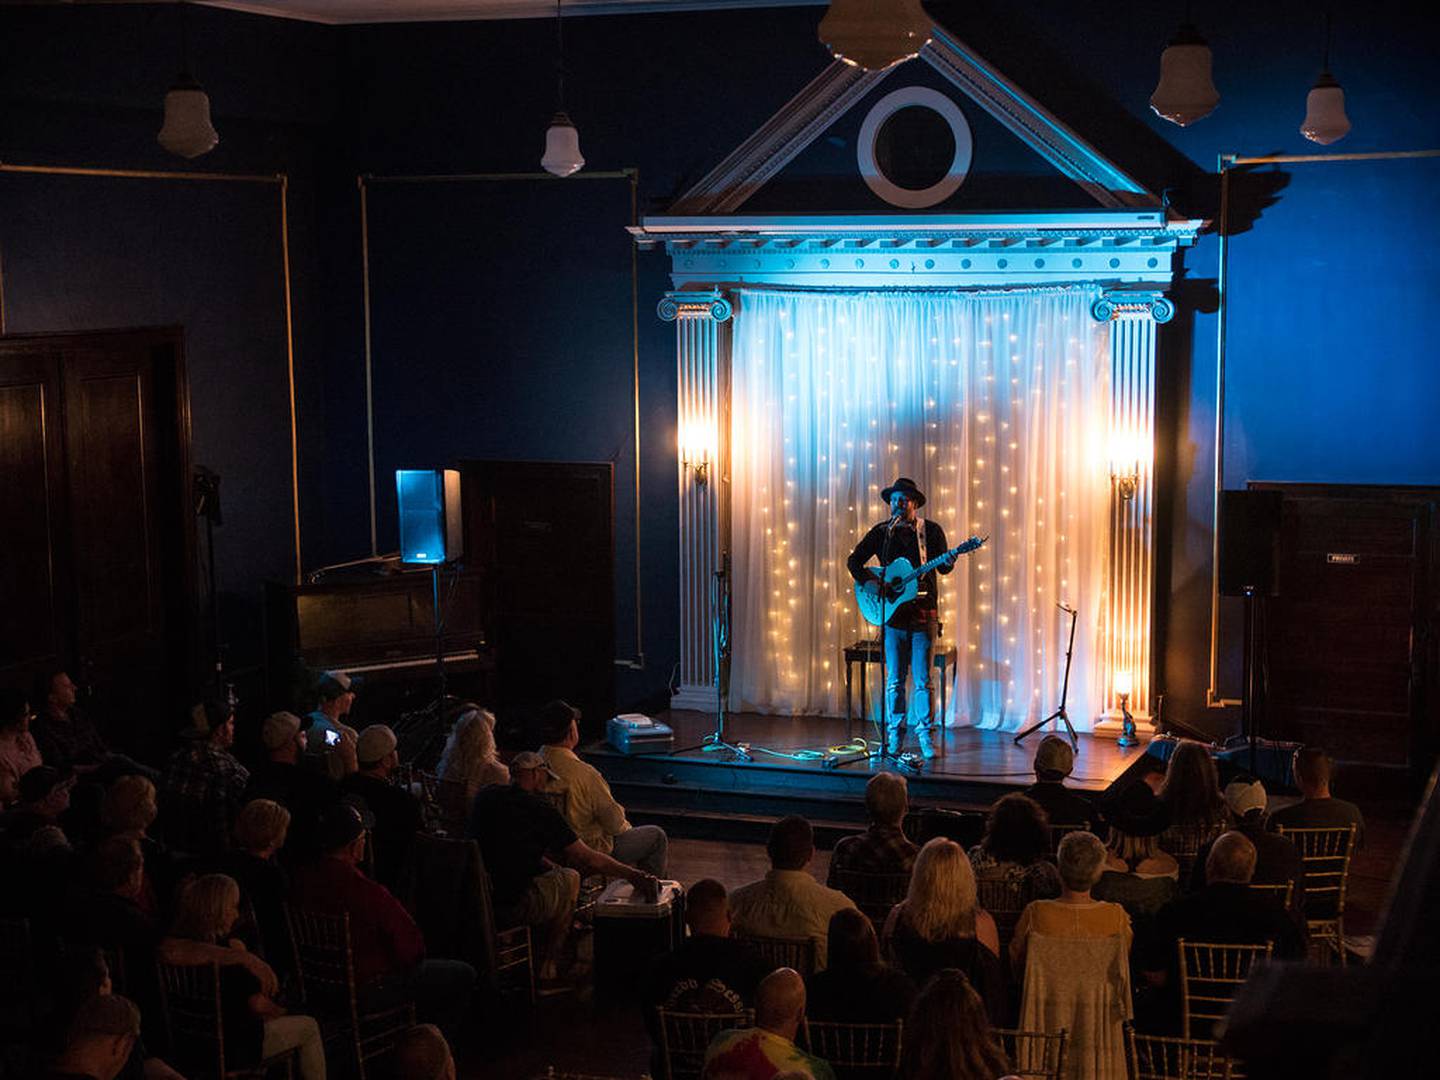 A musician performs at The 122 Club, located in a former Masonic Lodge in Streator.